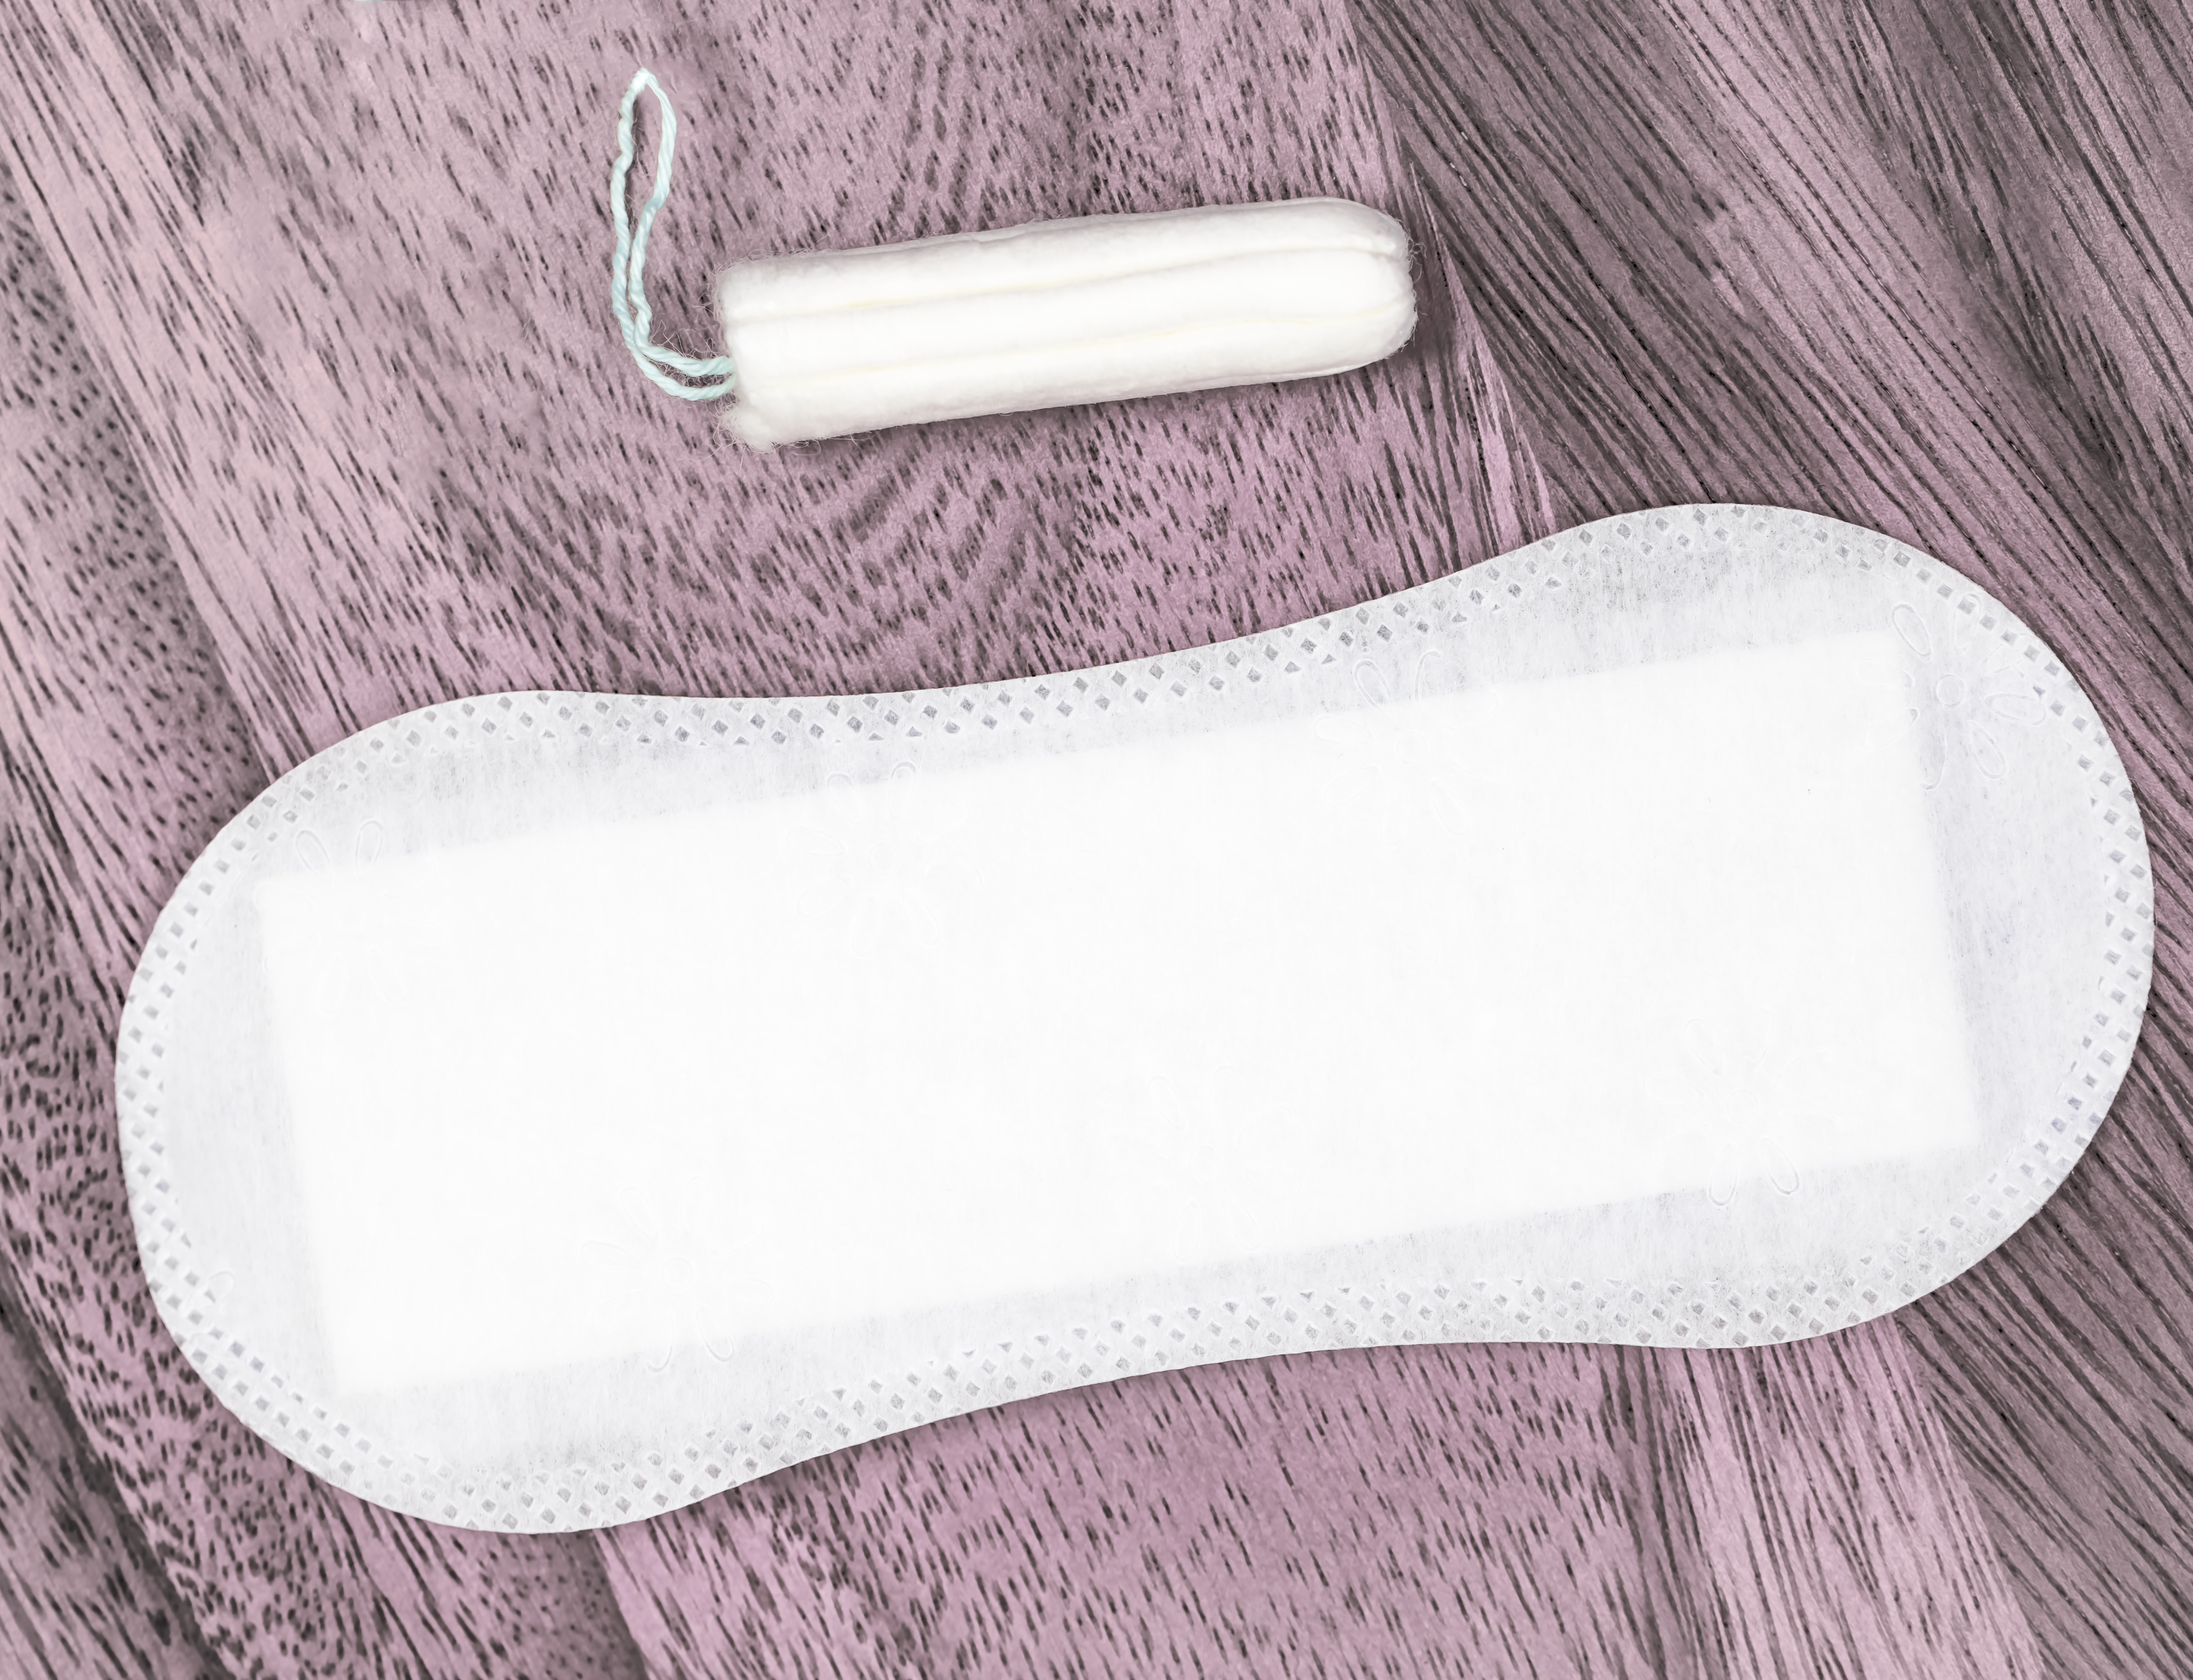 Selection of woman's hygiene items